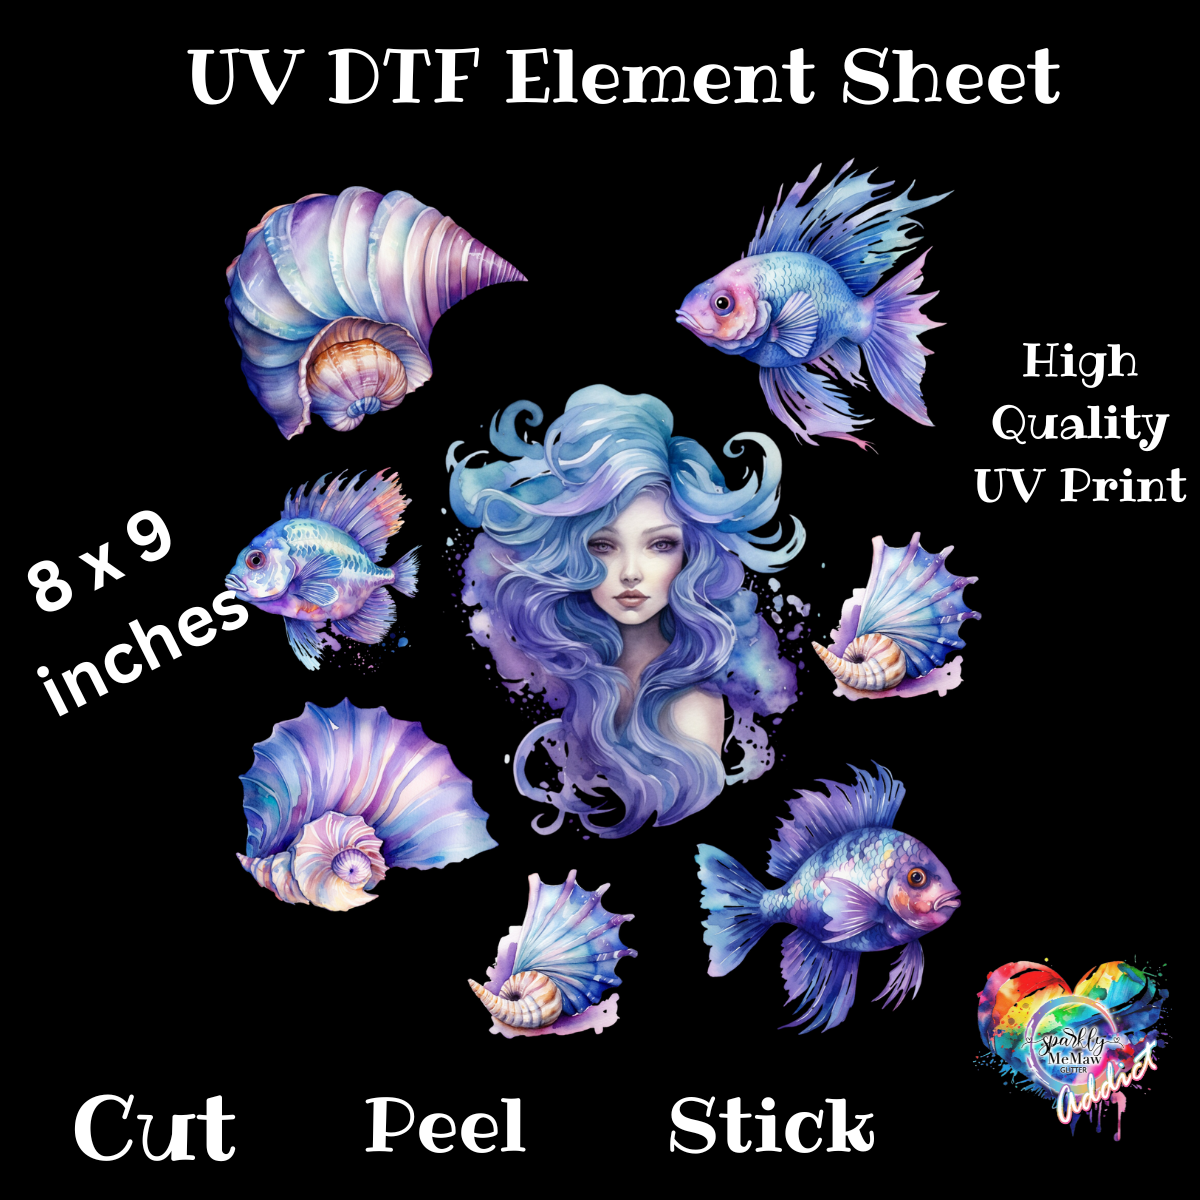 Blue Sea UV DTF Element Sheet 8x9 inches